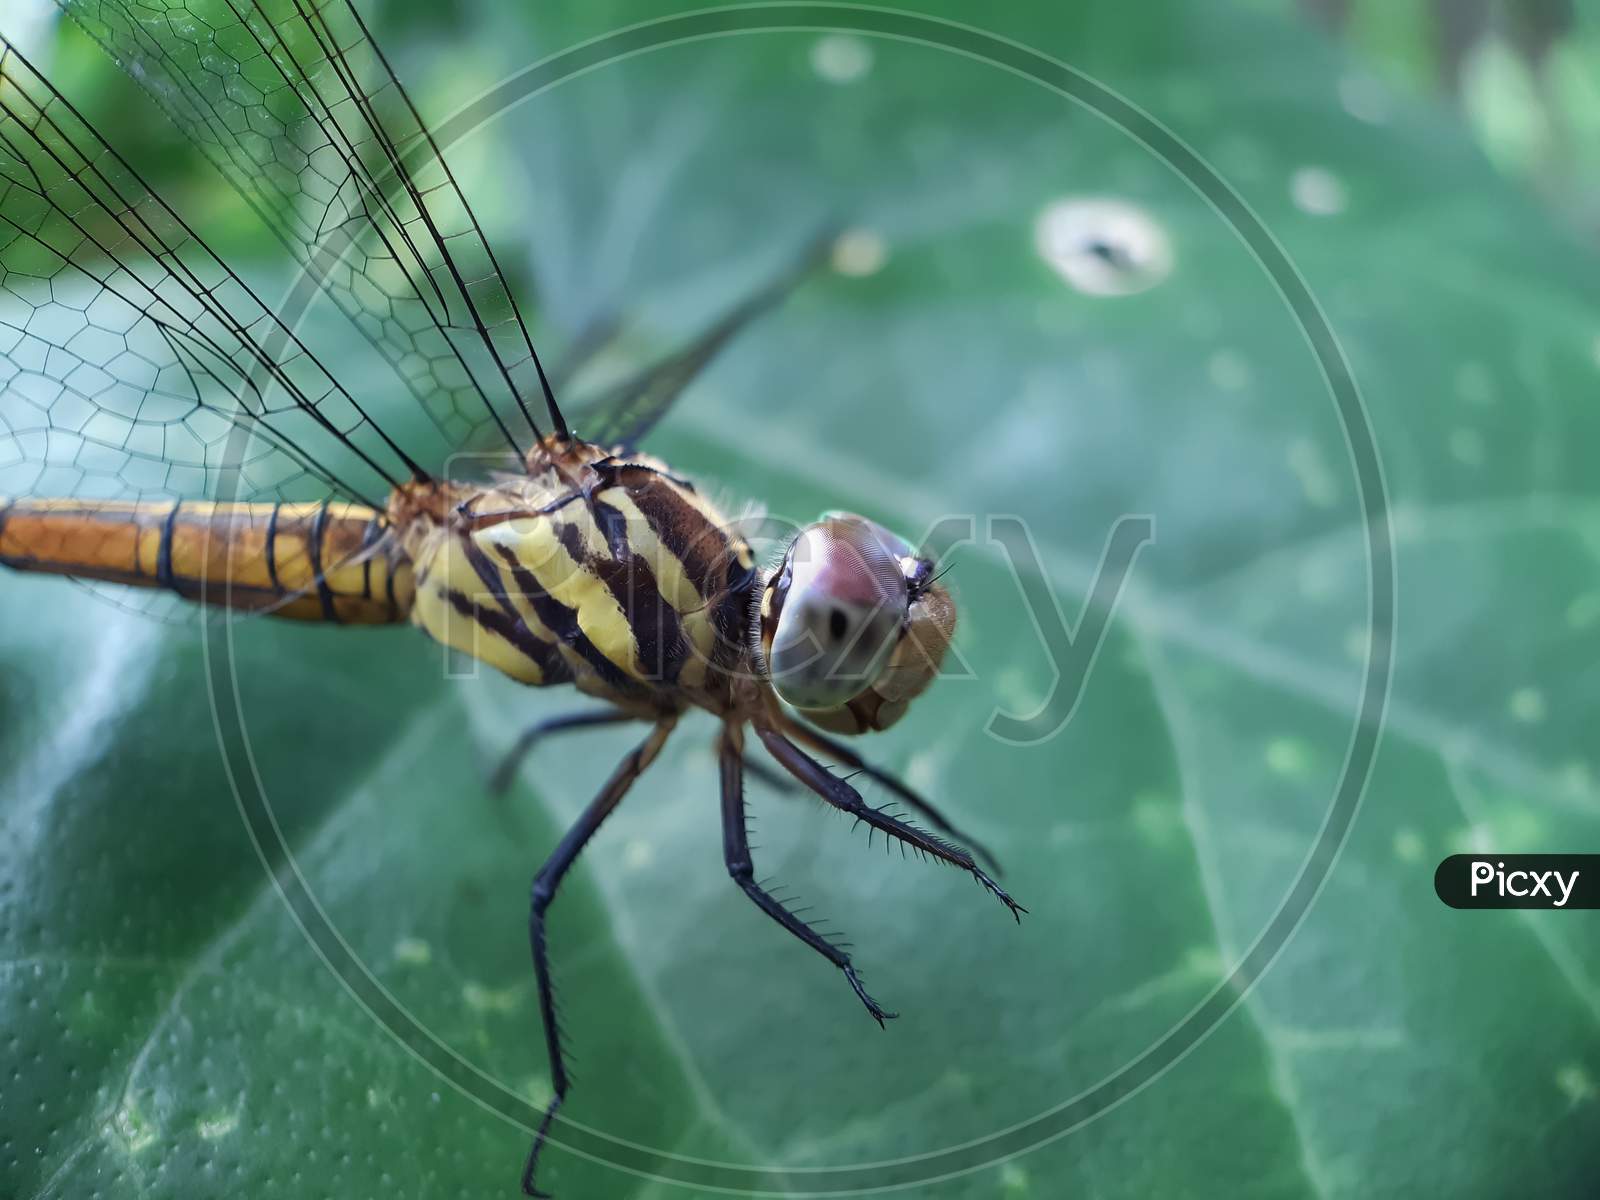 A Beautiful Dragon Fly Is Perched On The Leaves Of A Green Tree. This Is A Garden.